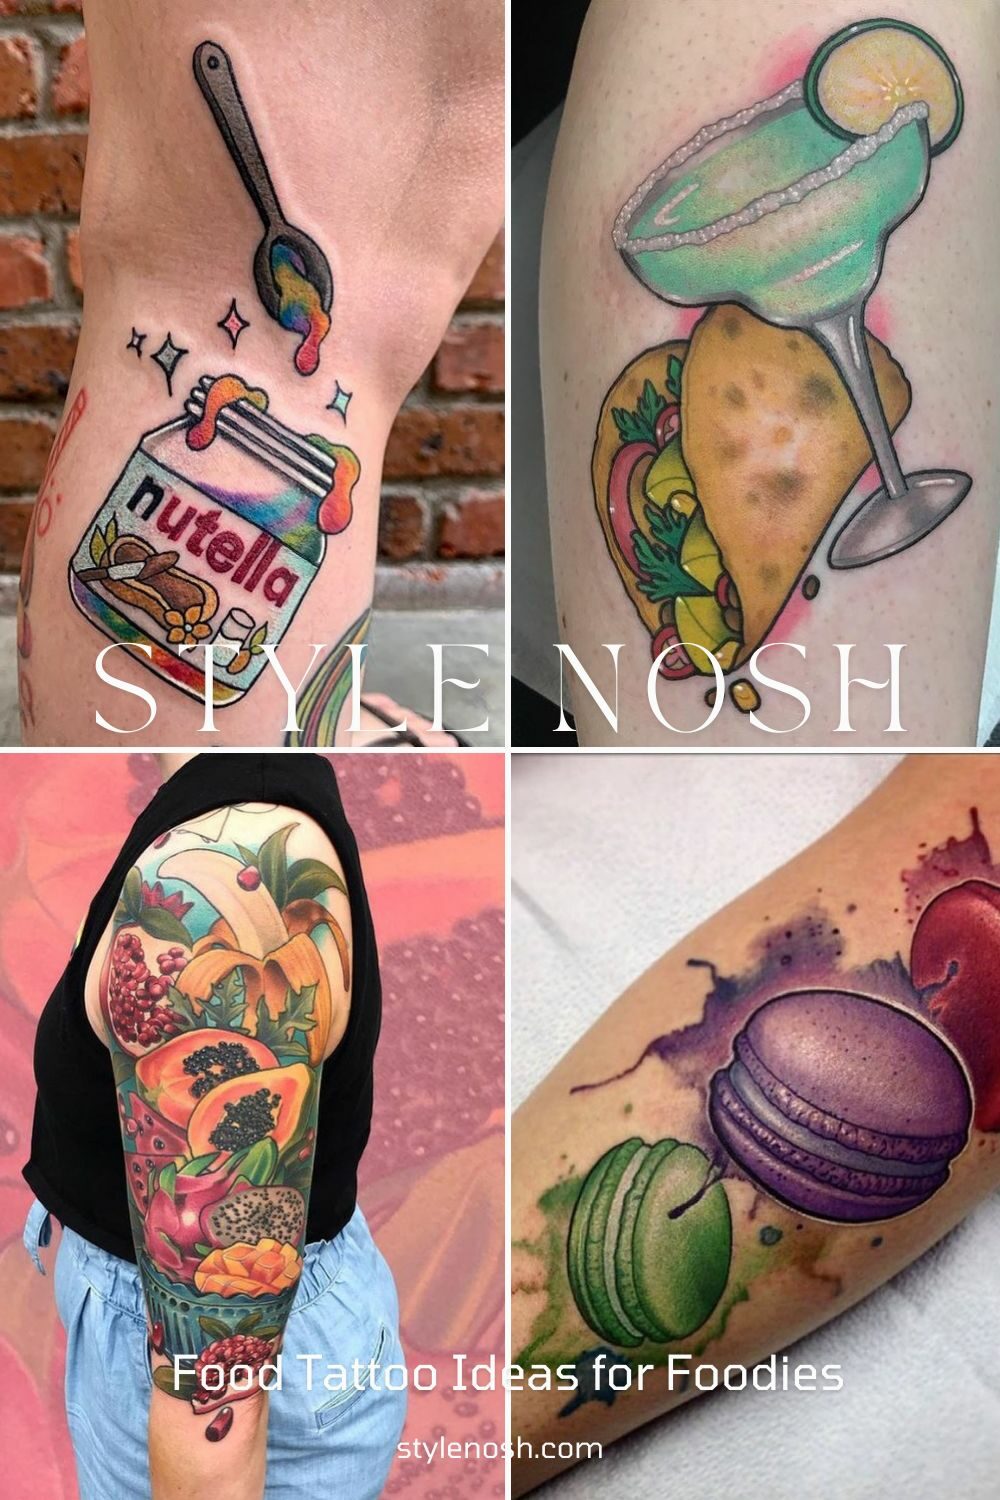 Getting a tattoo in the shape of food is a great way to show your gratitude